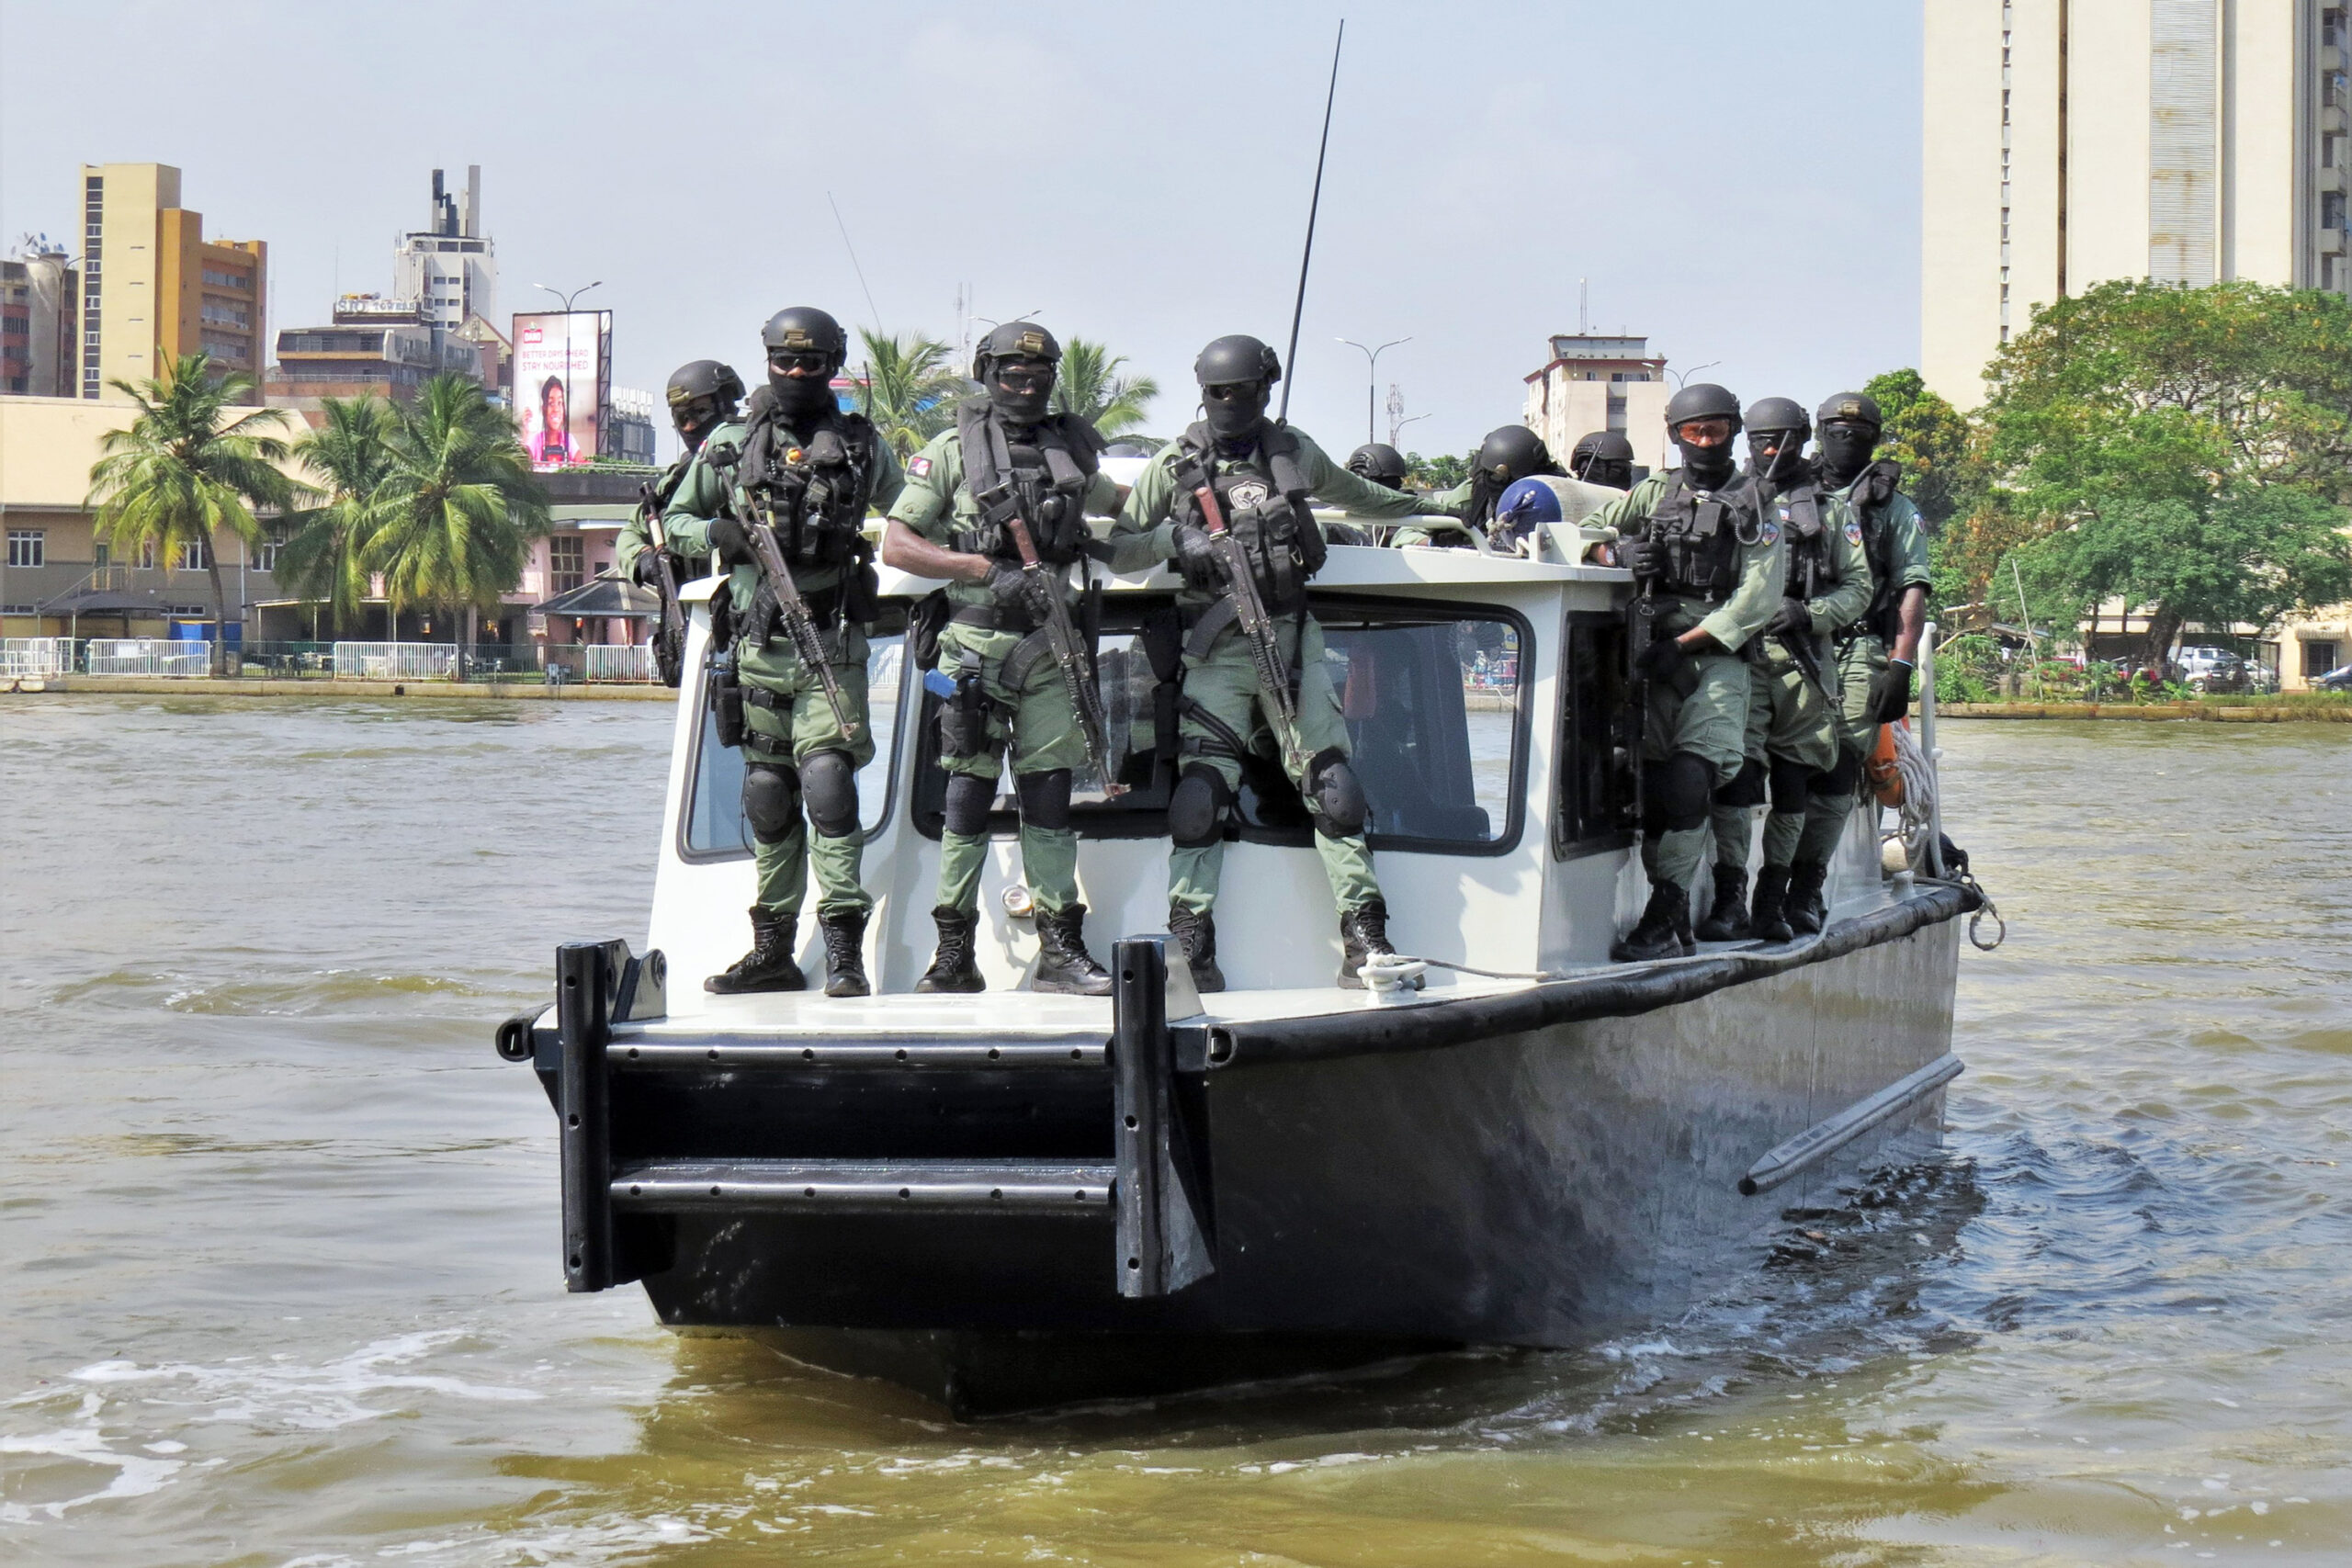 Nigerian police assigned to protect U.S. diplomatic facilities and personnel operate one of their patrol boats in the coastal city of Lagos in November 2020. The police are part of a Special Program for Embassy Augmentation Response (SPEAR) team. SPEAR teams are quick-response forces trained and funded by the Diplomatic Security Service’s Office of Antiterrorism Assistance (ATA). (Department of State photo)